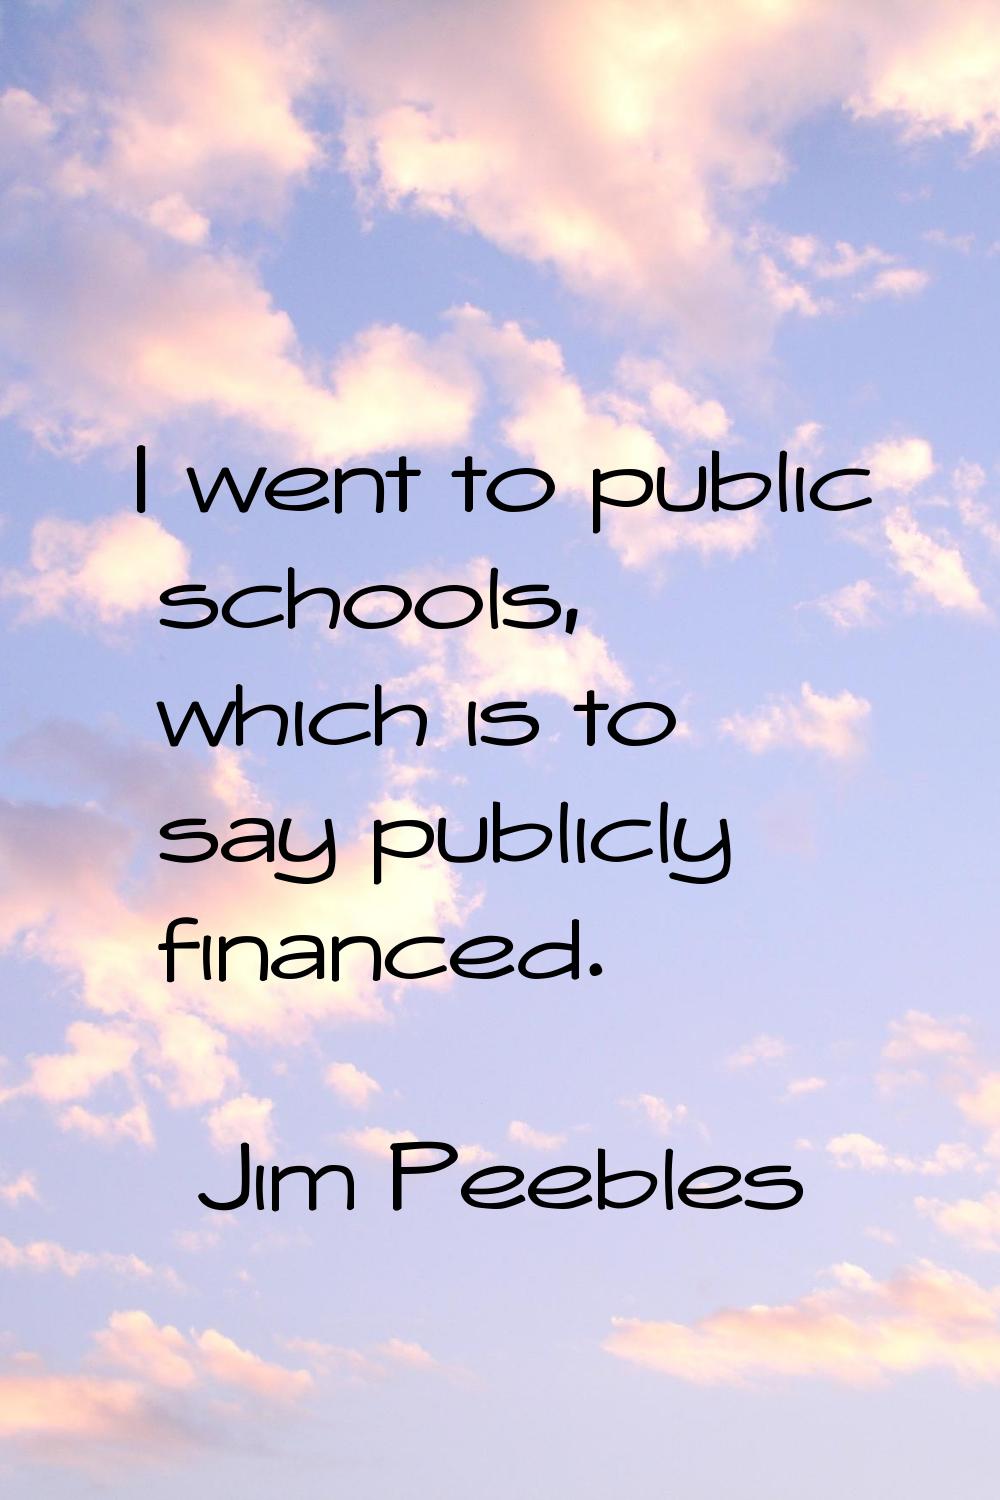 I went to public schools, which is to say publicly financed.